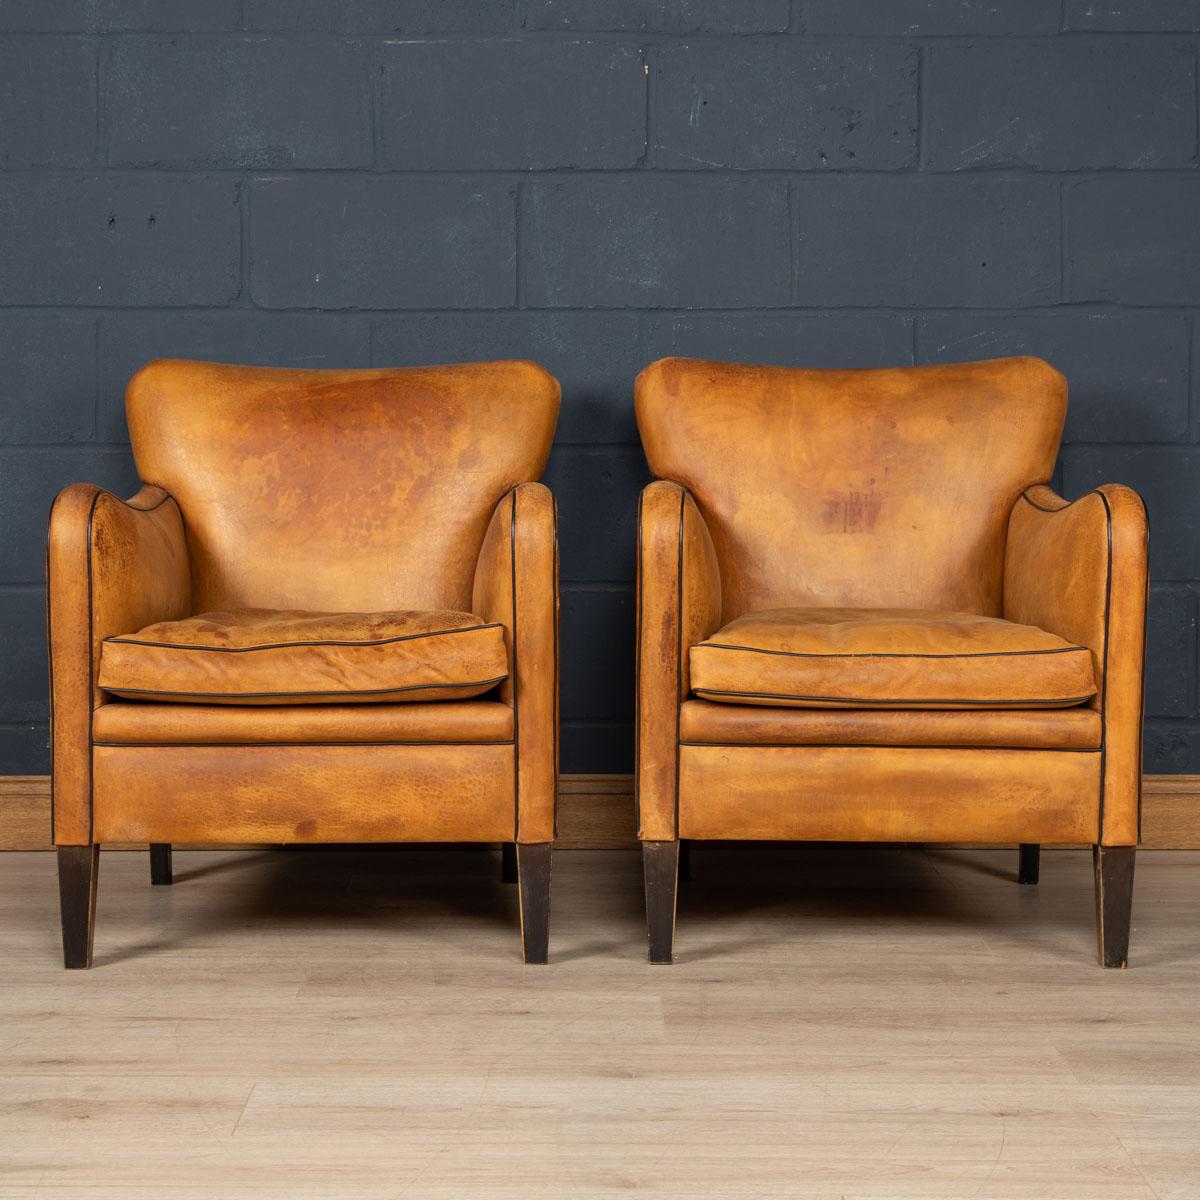 Showing superb patina and colour, this wonderful pair of club chairs were hand upholstered sheepskin leather in Holland by the finest craftsmen in the latter part of the 20th century.

CONDITION
In Good Condition - Some wear consistent with